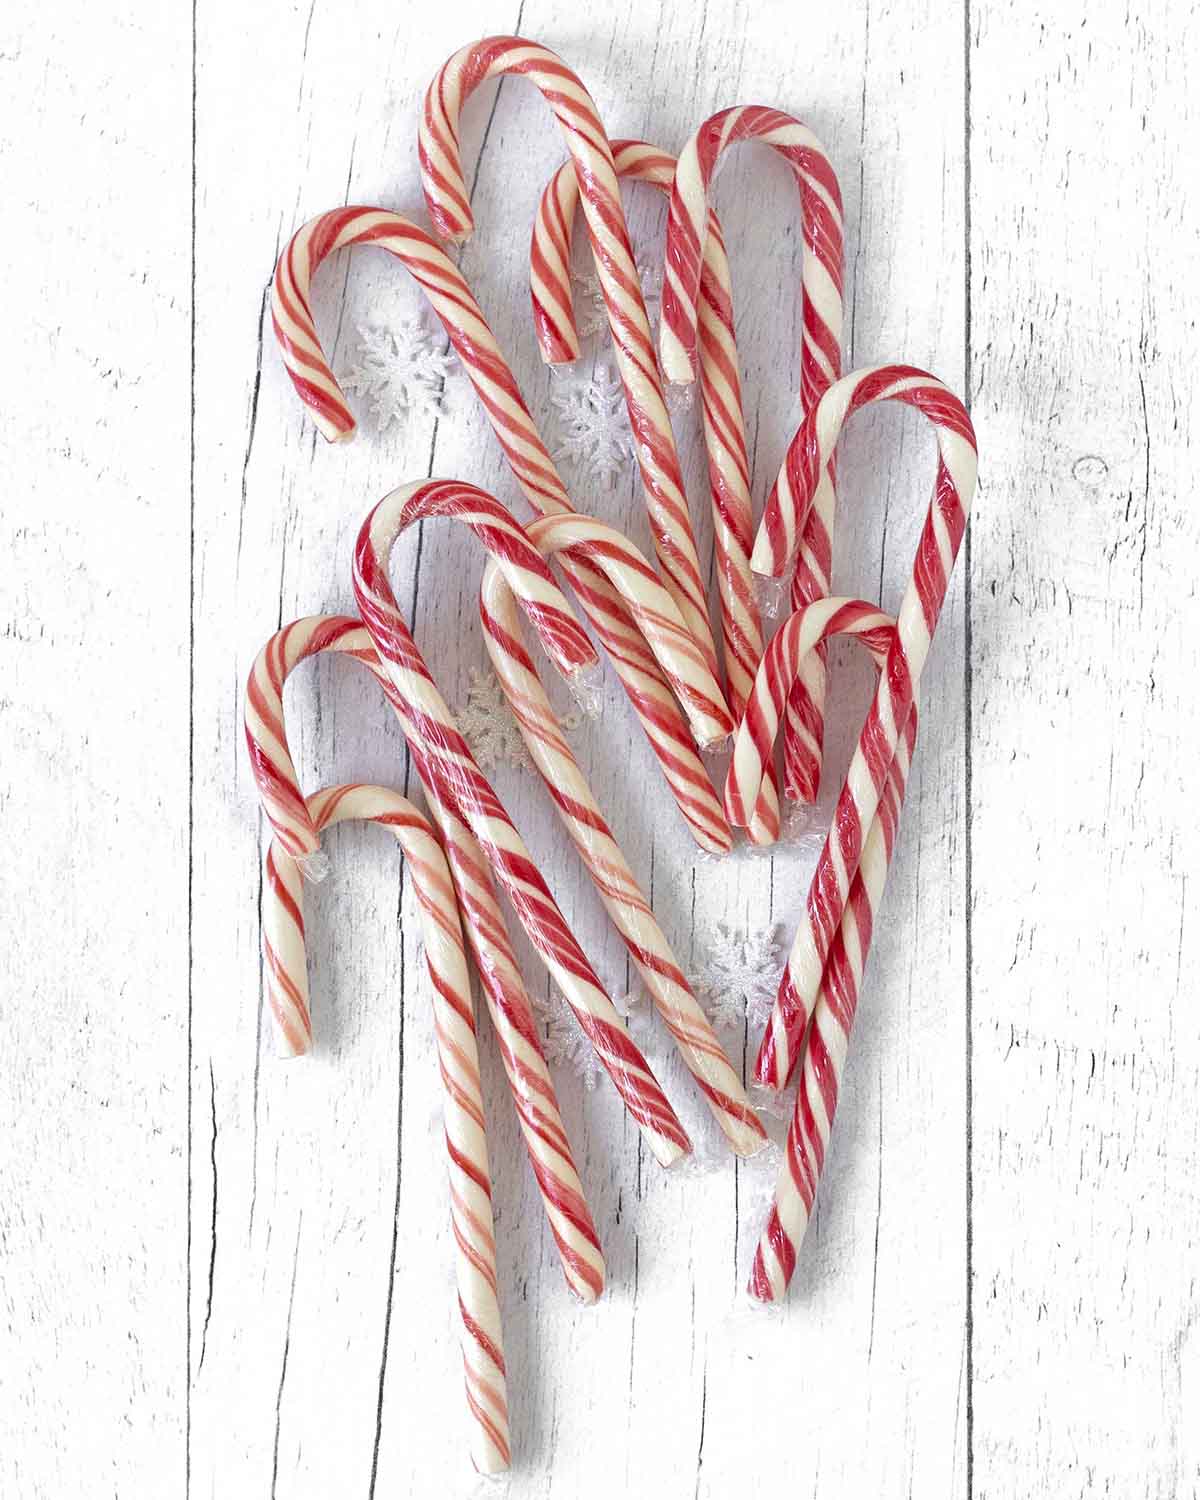 Full size vegan candy canes lying on a white wooden table.